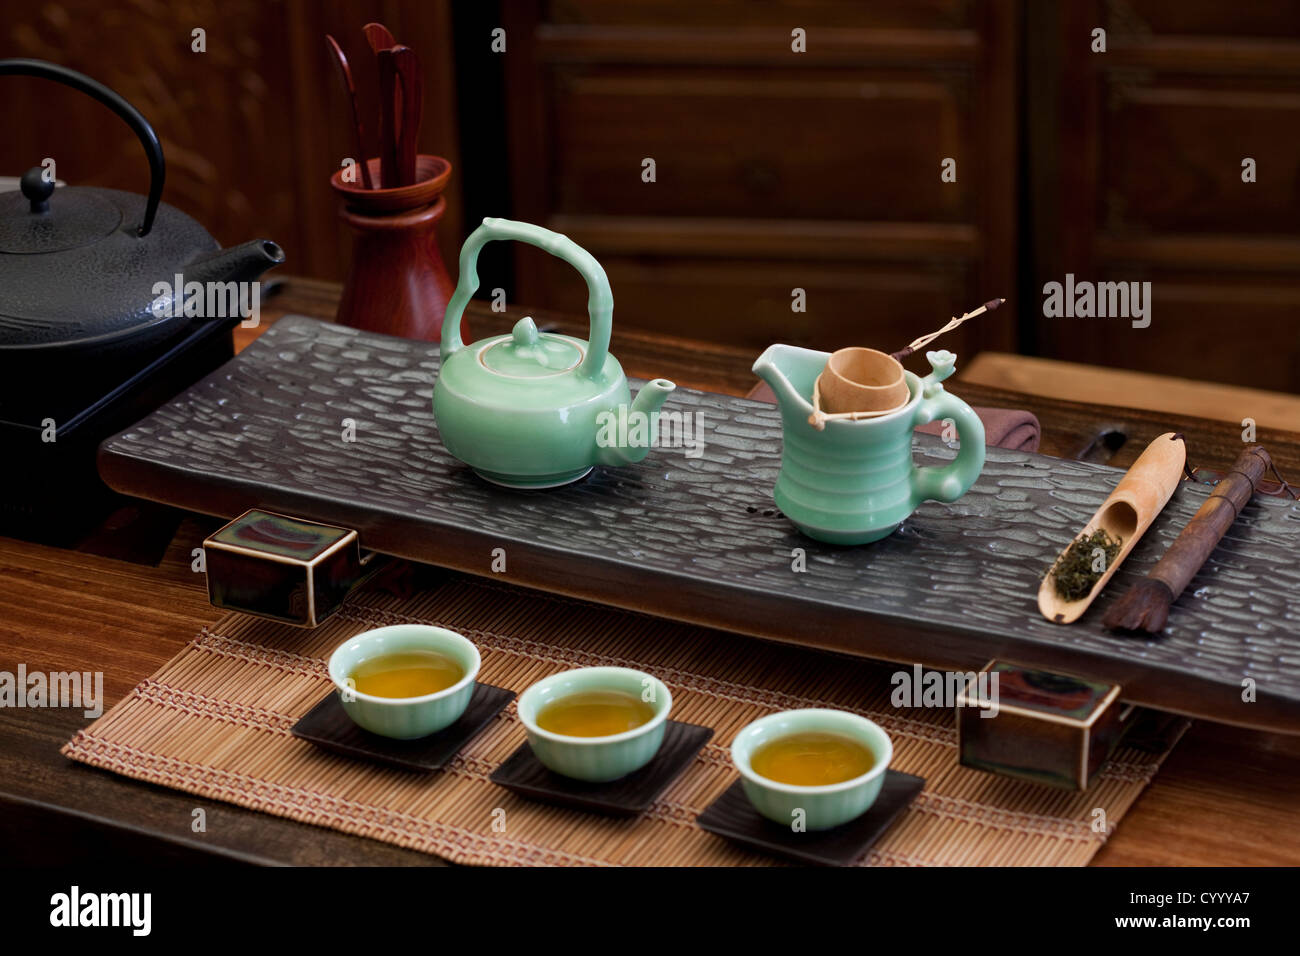 Traditional Chinese Tea Set In A Tea Room Stock Photo